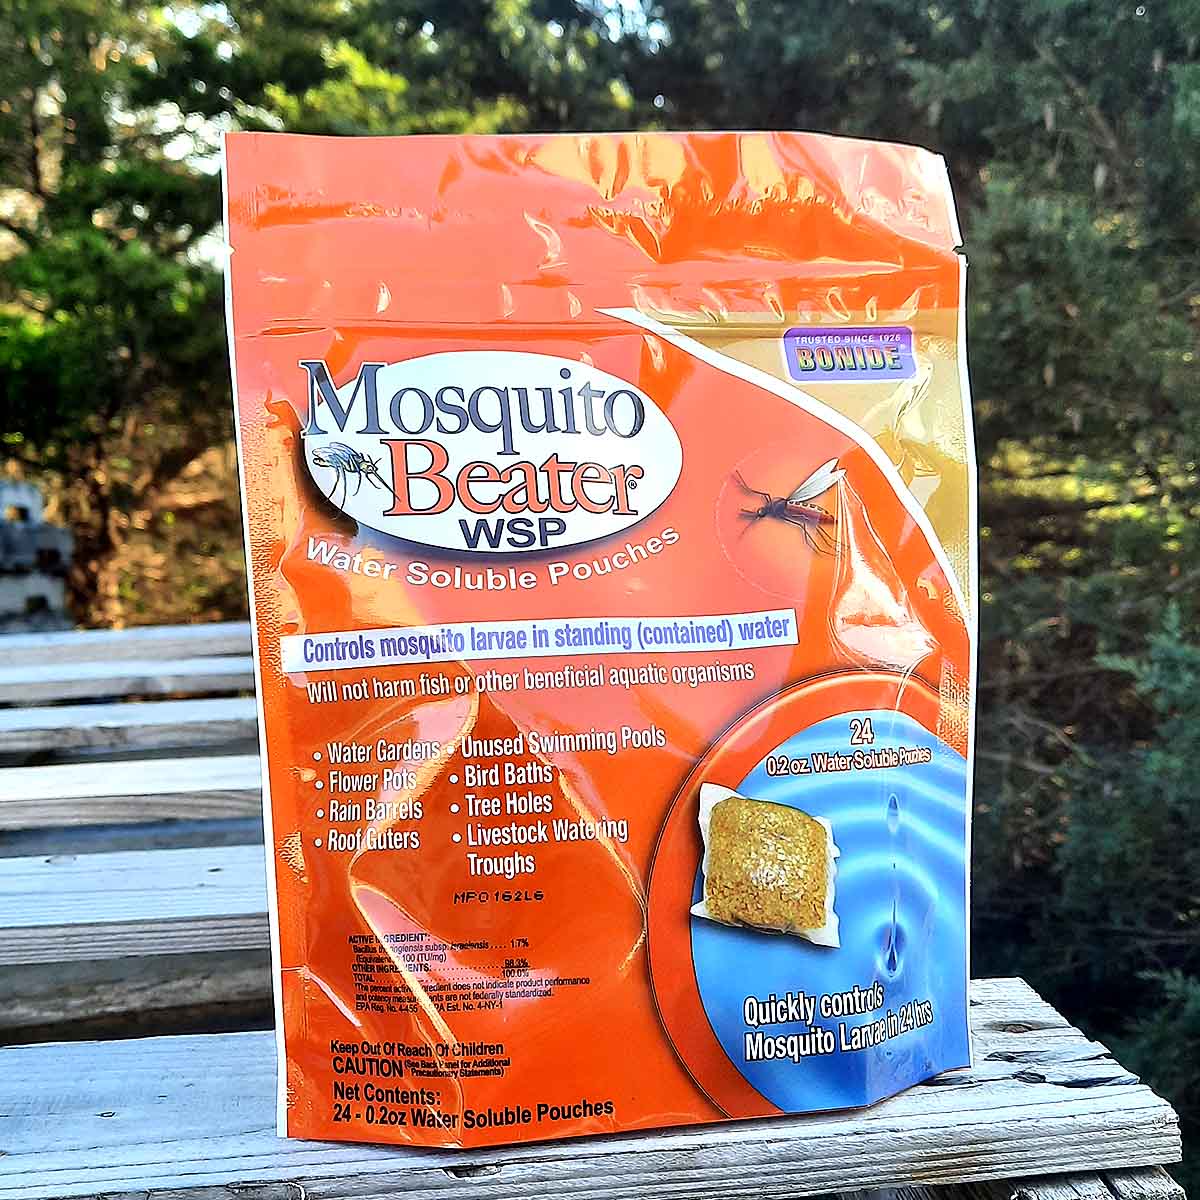 Mosquito Beater Water Soluble Pouches